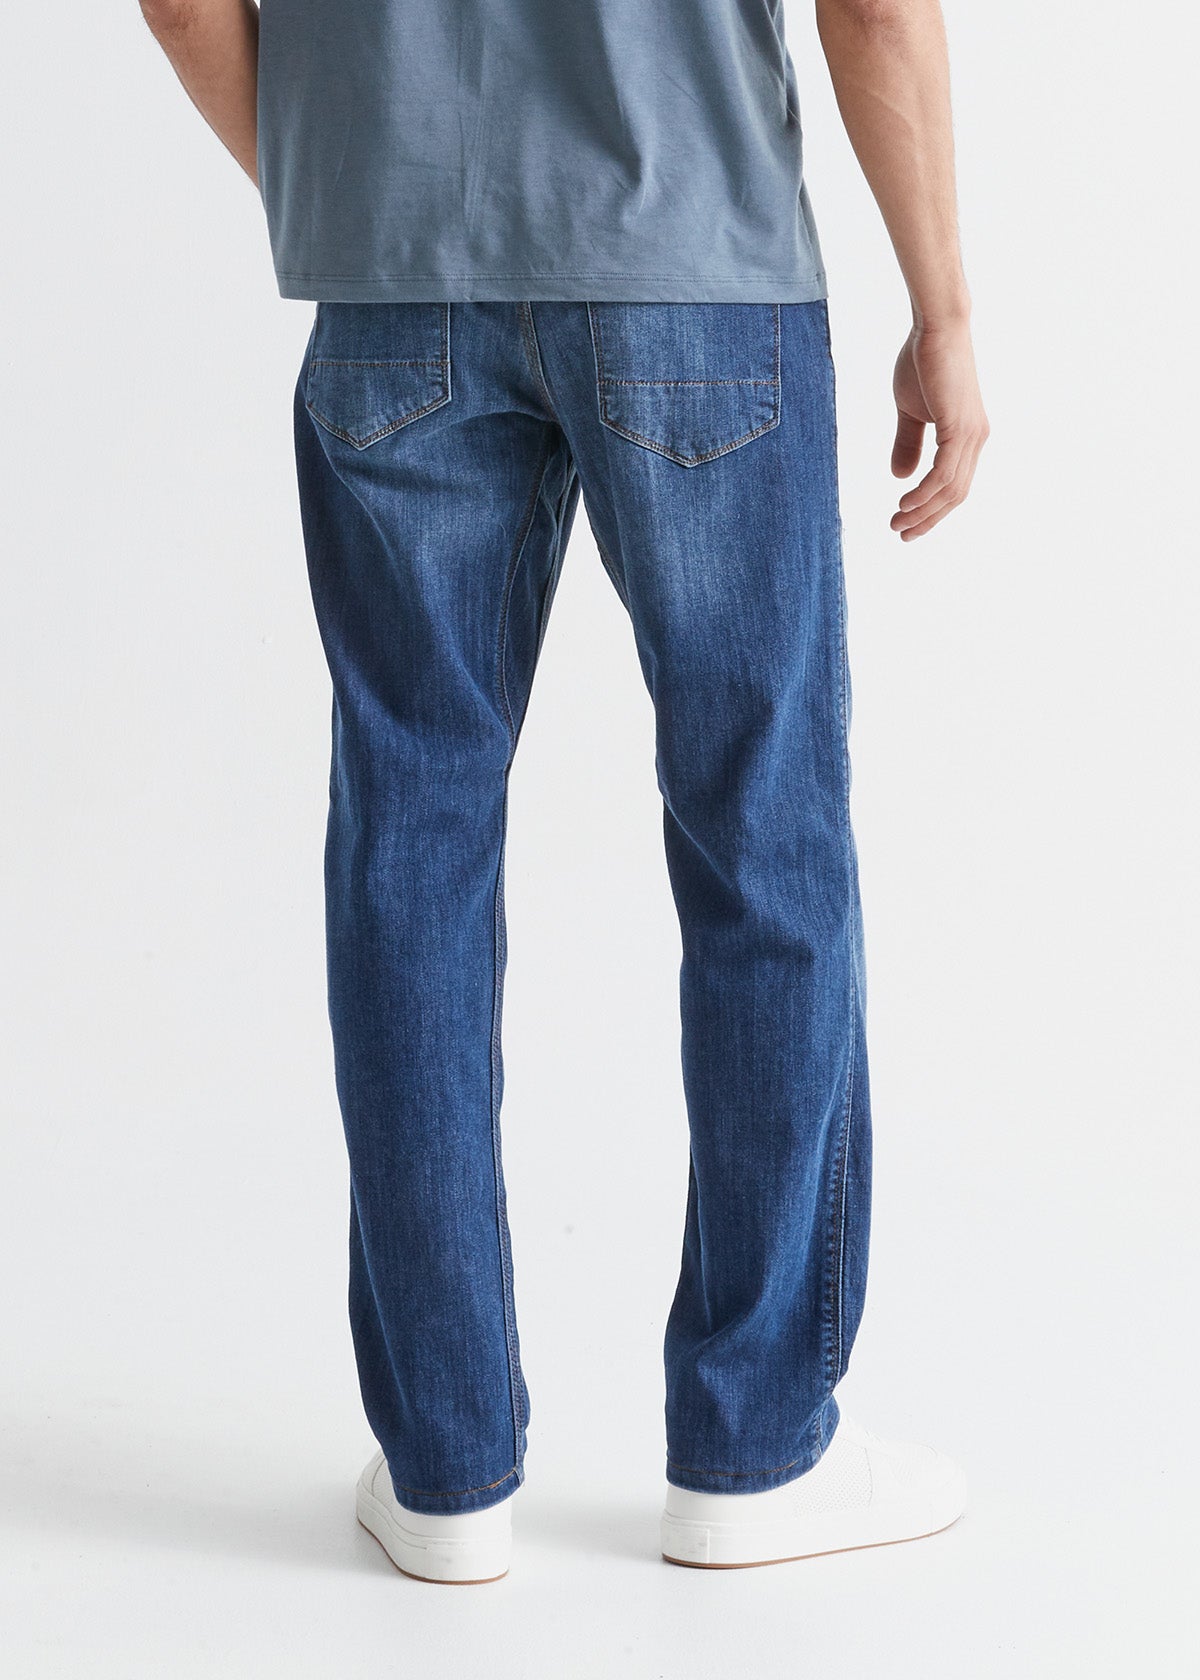 Apt 19 Jeans, 9®'s Premier Flex Performance technology, these pants offer  stretch and flexibility.